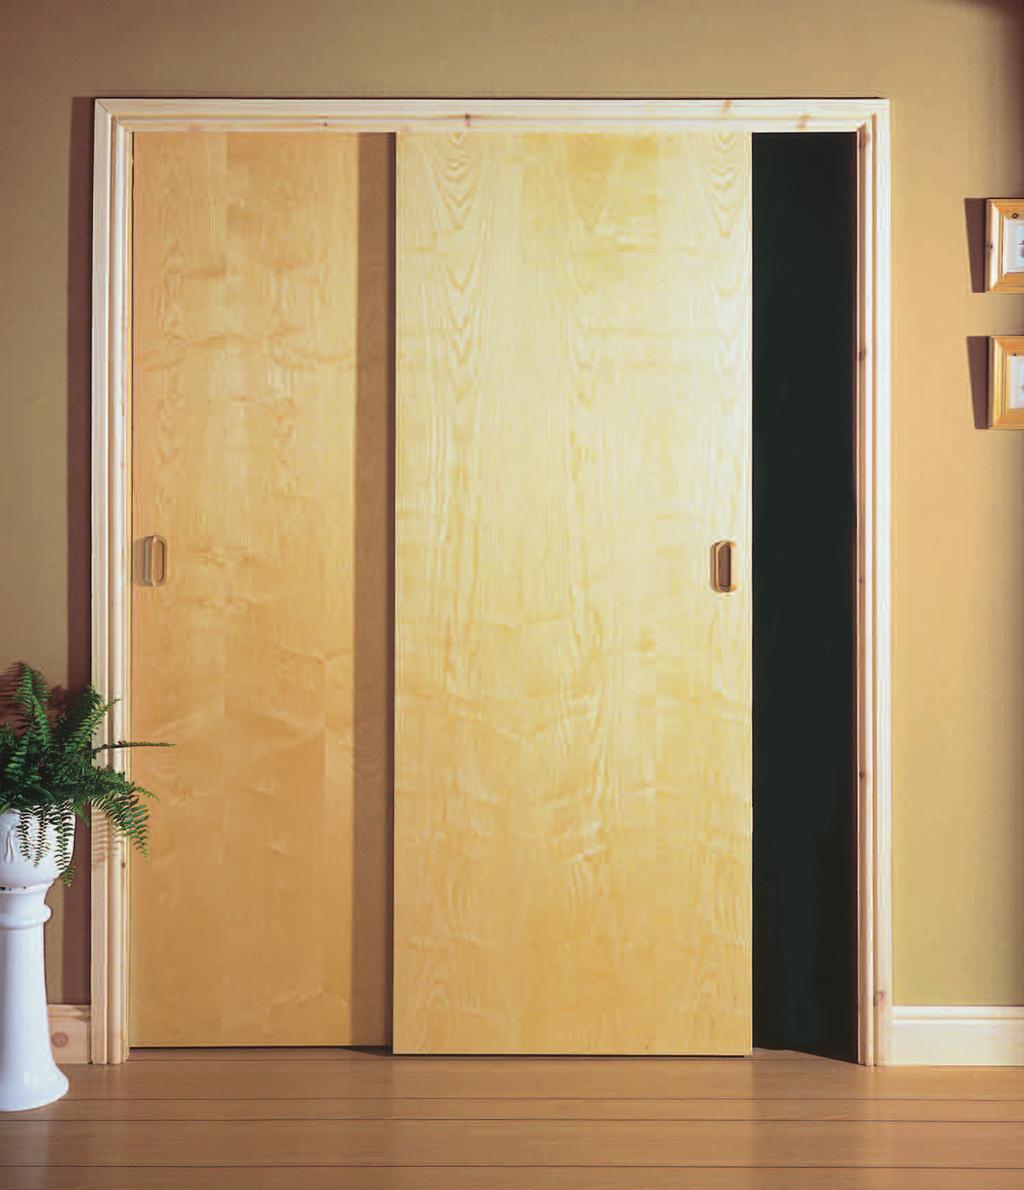 max 1200mm W15 max 1500mm W18 max 1800mm W24 max 2400mm Bifold for folding wardrobe doors up to 14kg for timber, timber framed or composite doors stable and smooth running suitable for jambless